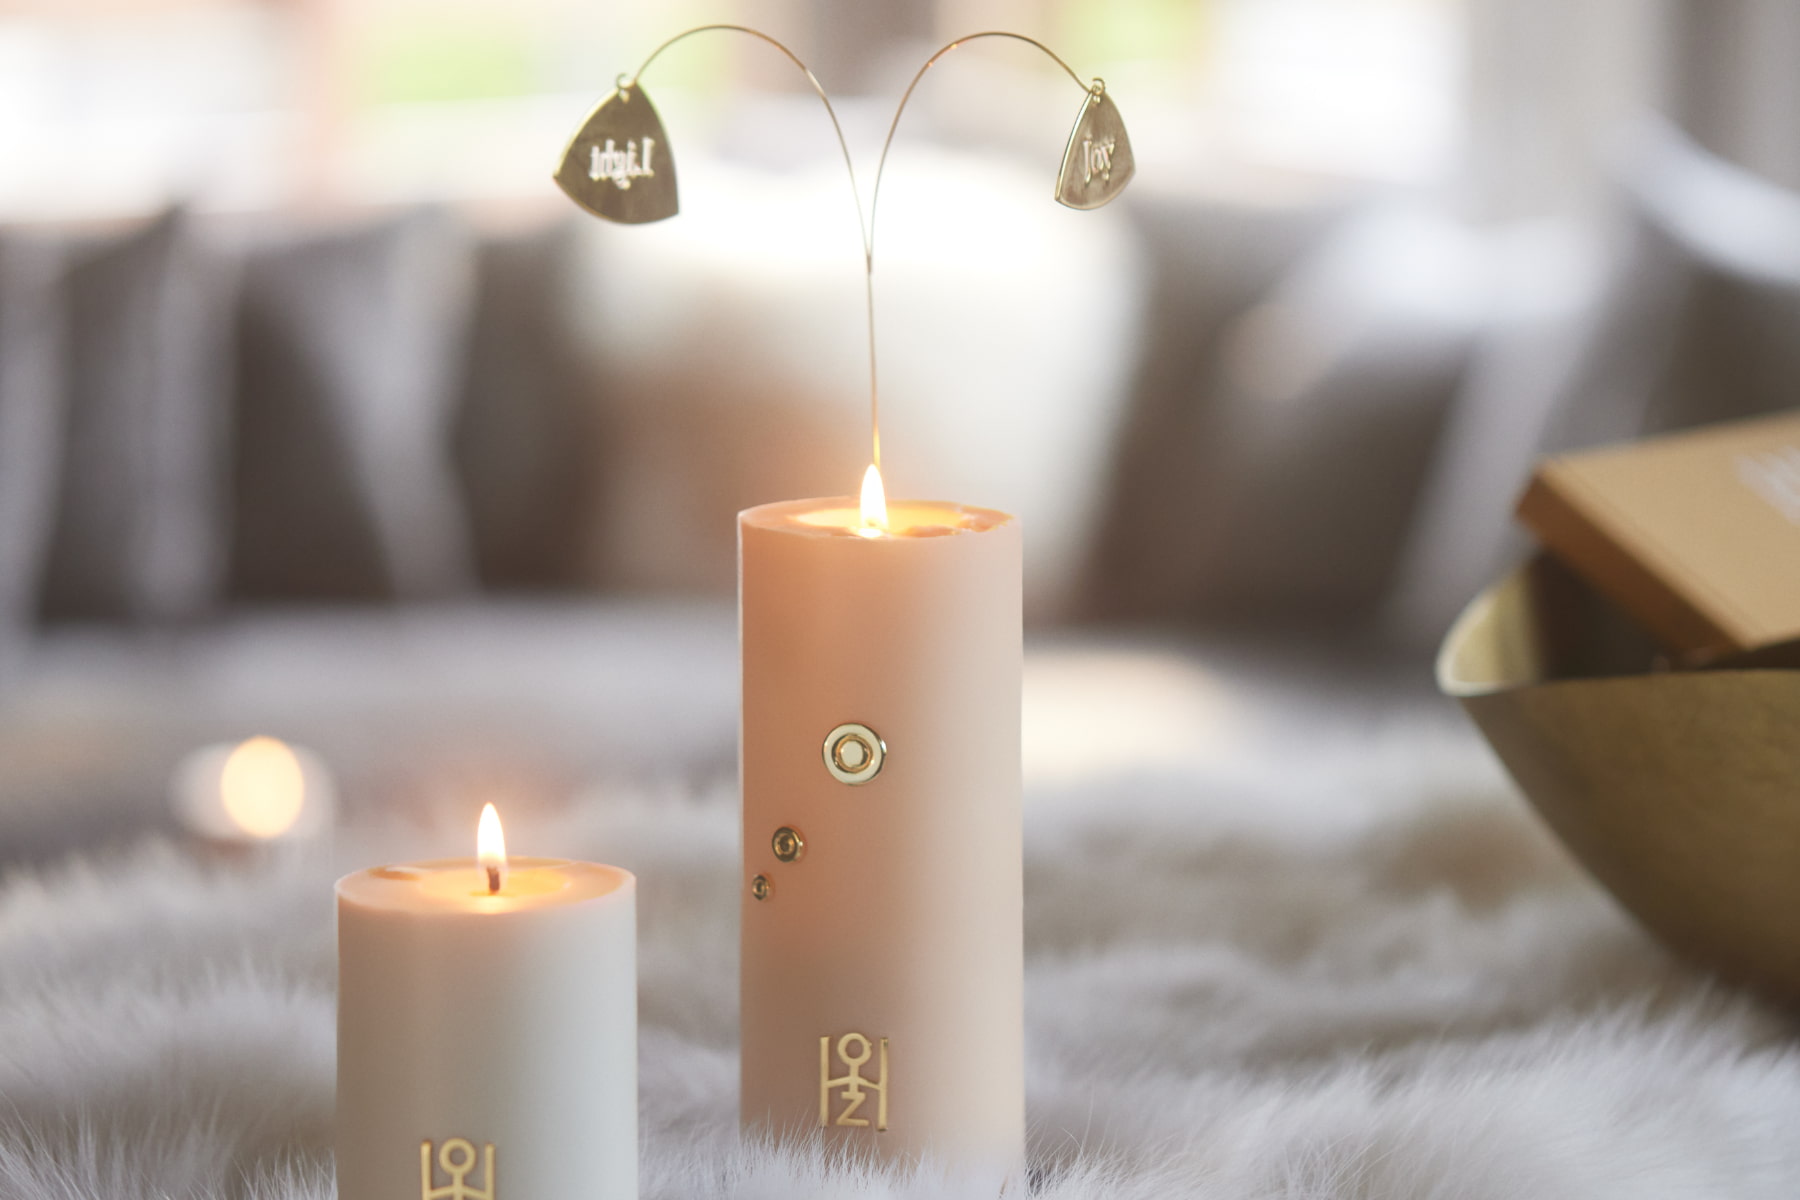 Candle jewelry with intentions